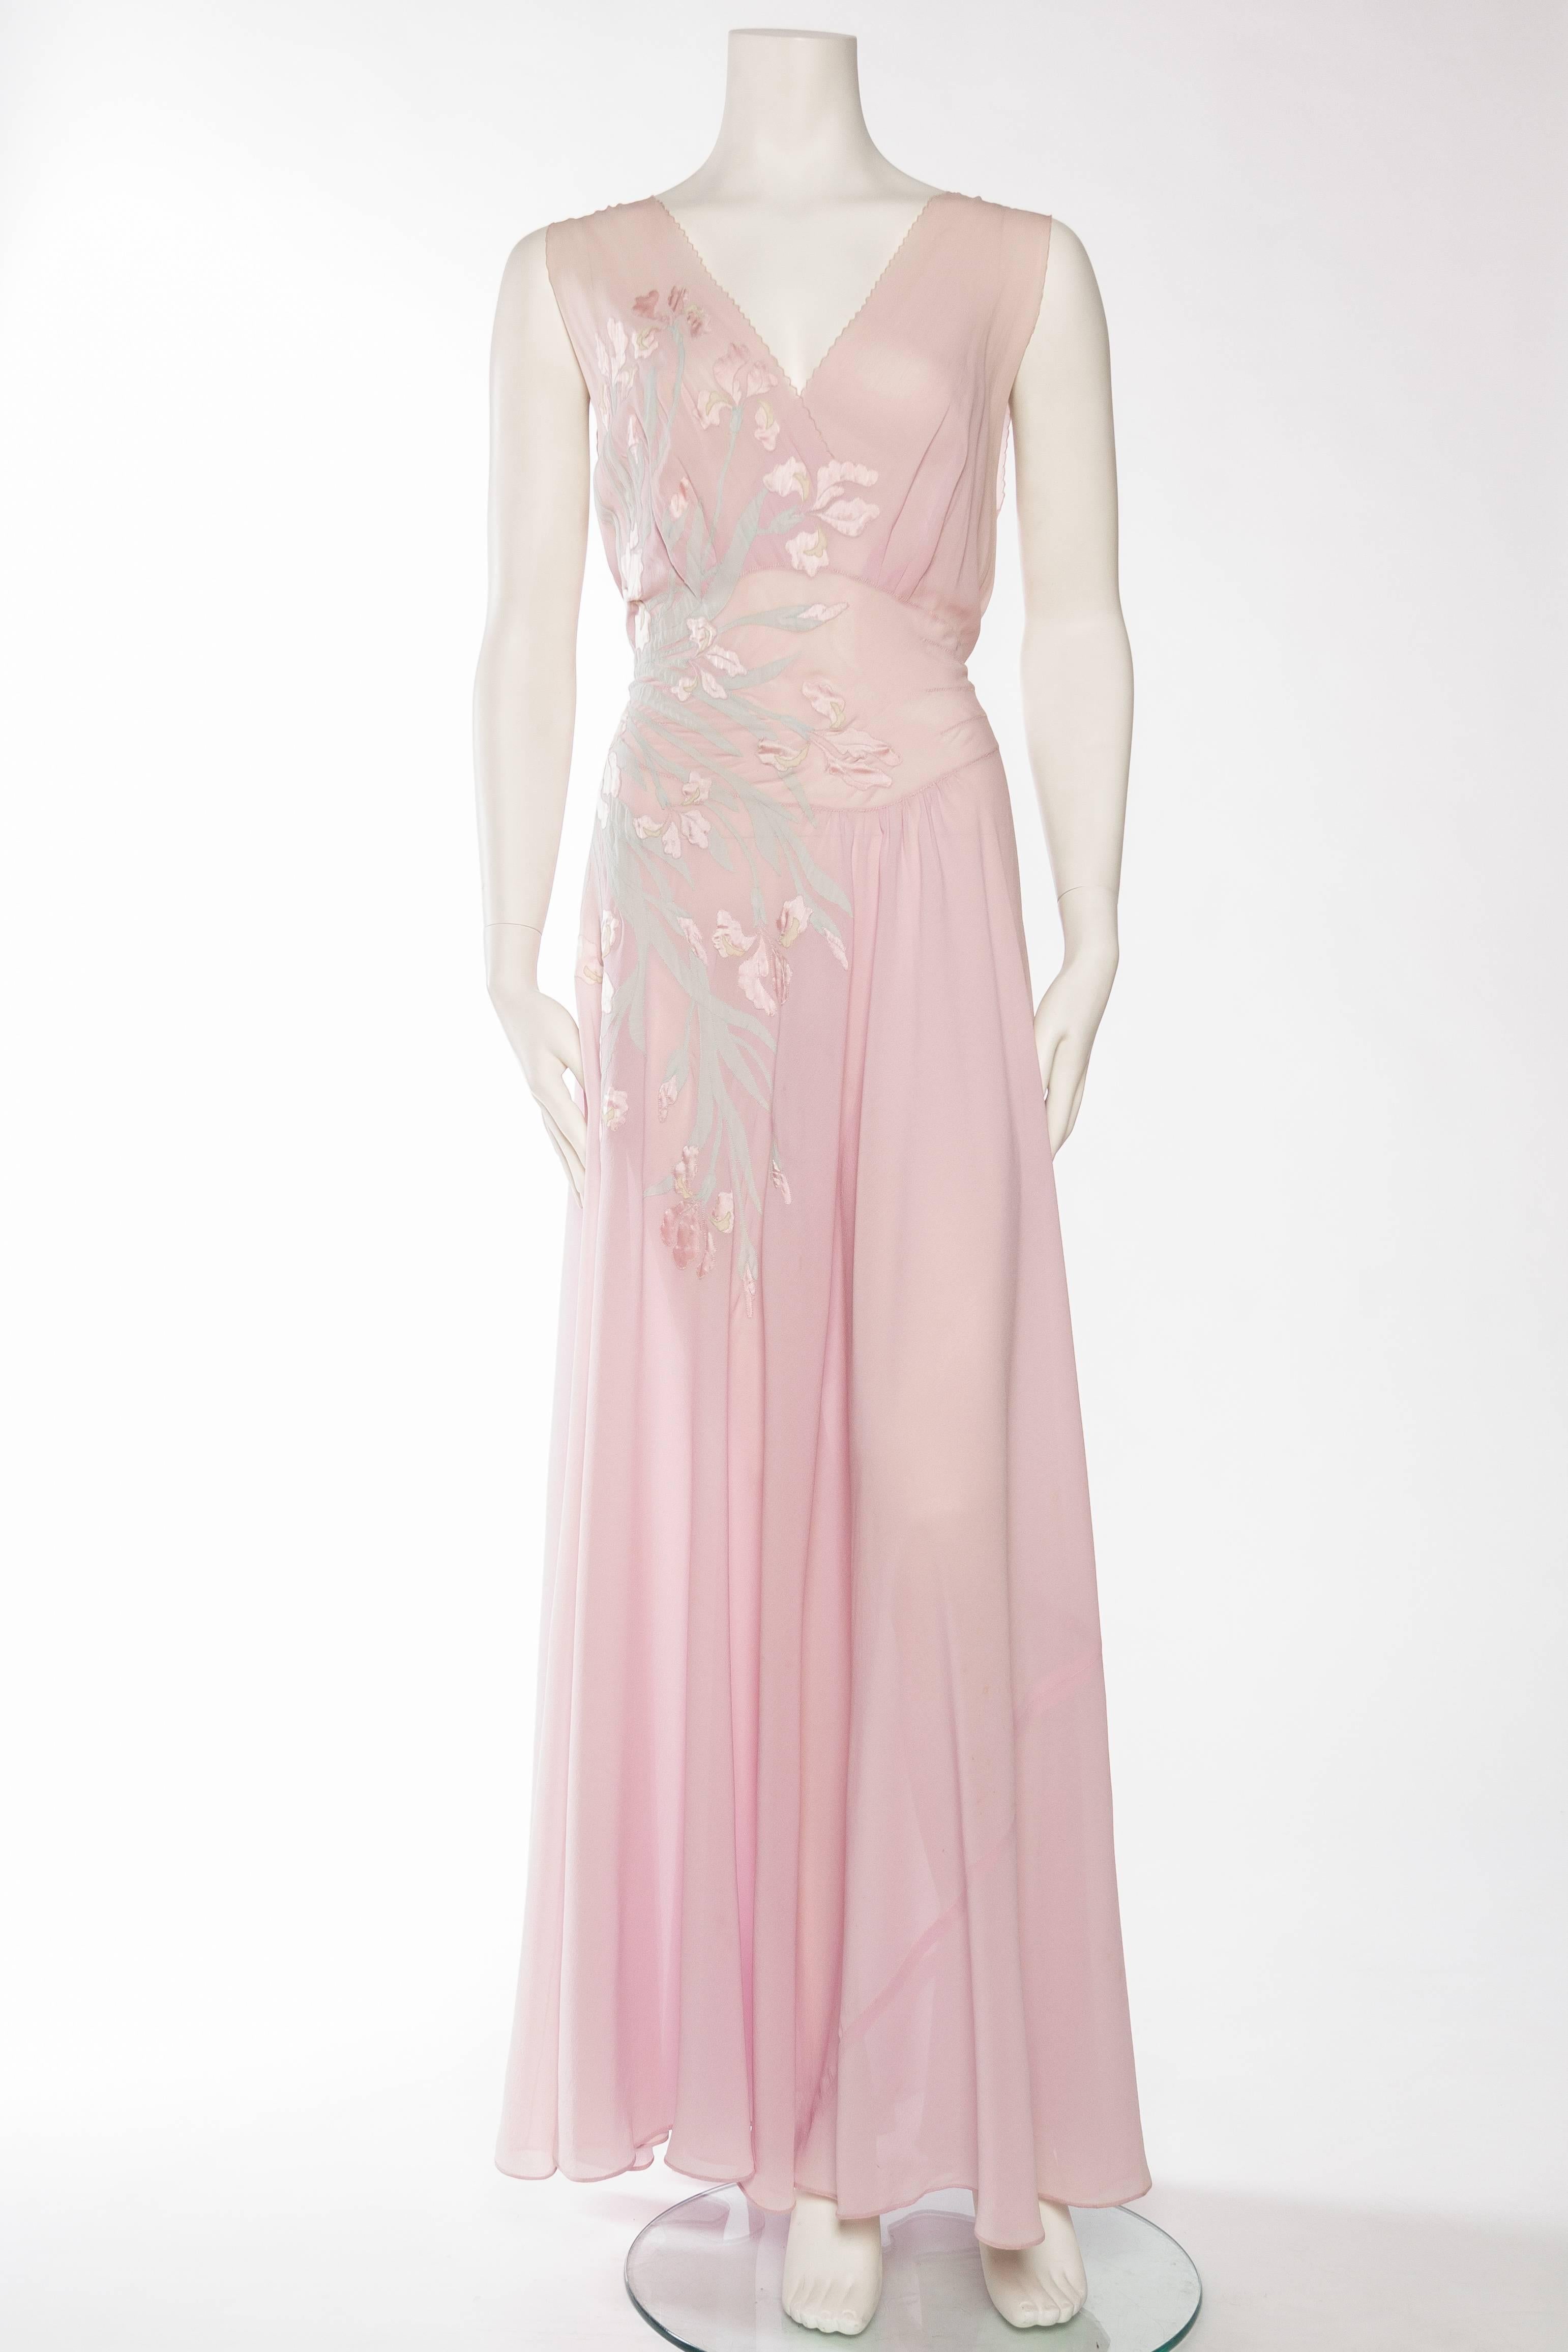 This by far is the most phenomenal negligee we have ever seen. The sheer mastery of the couture seamstress who appliquéd the delicate strips of silk chiffon and satin onto the bias cut of this piece is mind boggling. Also a rare larger size however